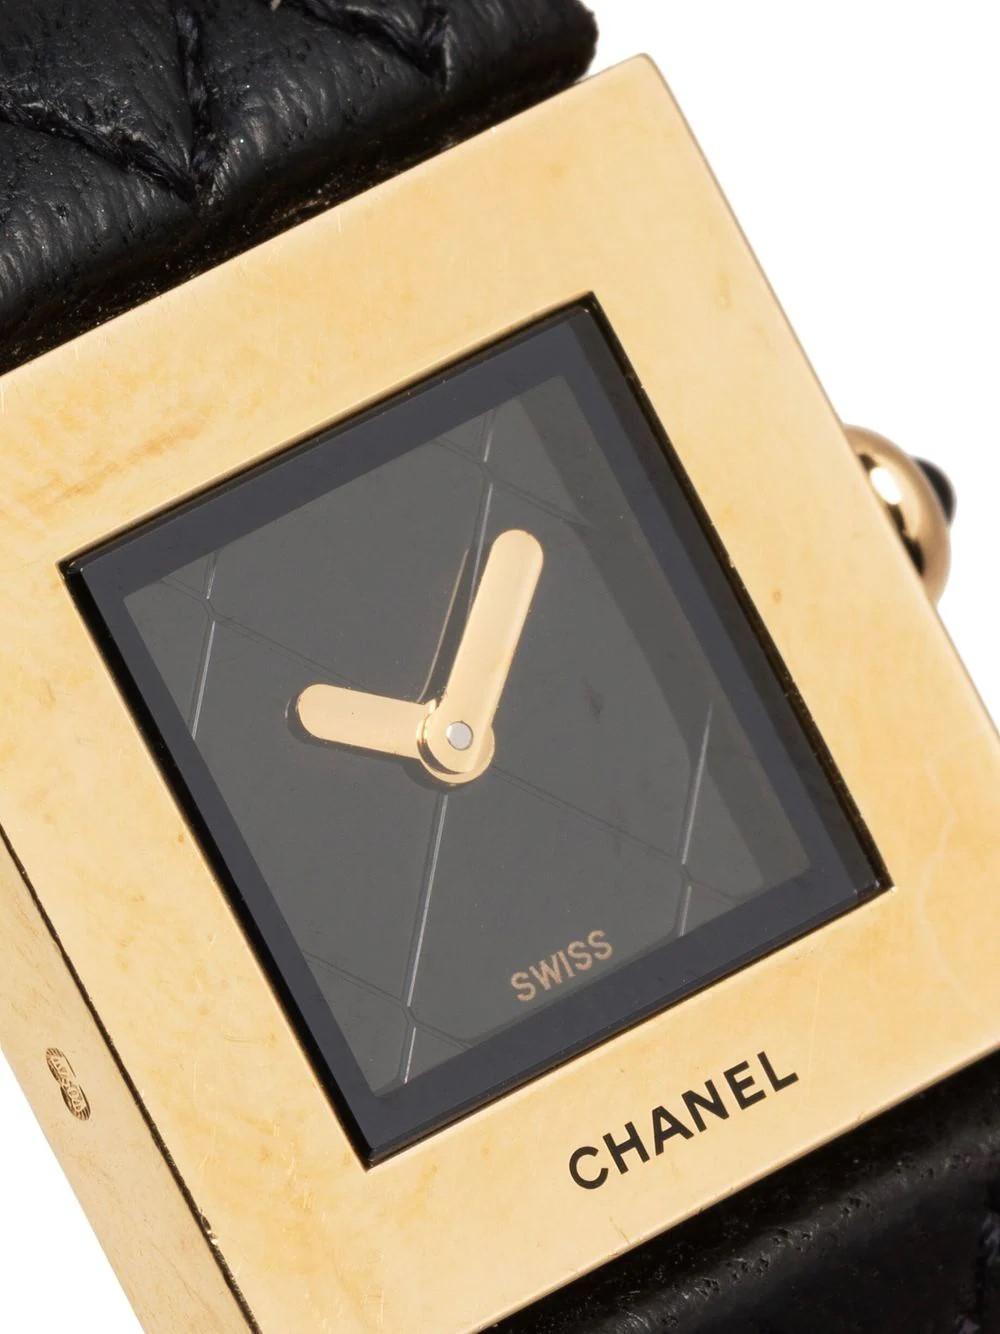 A Chanel watch should be the next piece to add to your watch collection. Simple, small, yet classic and sophisticated, this Matelasse watch from 1993 does it all. Some of the features include a square face, baton hands, screw-down crown, leather